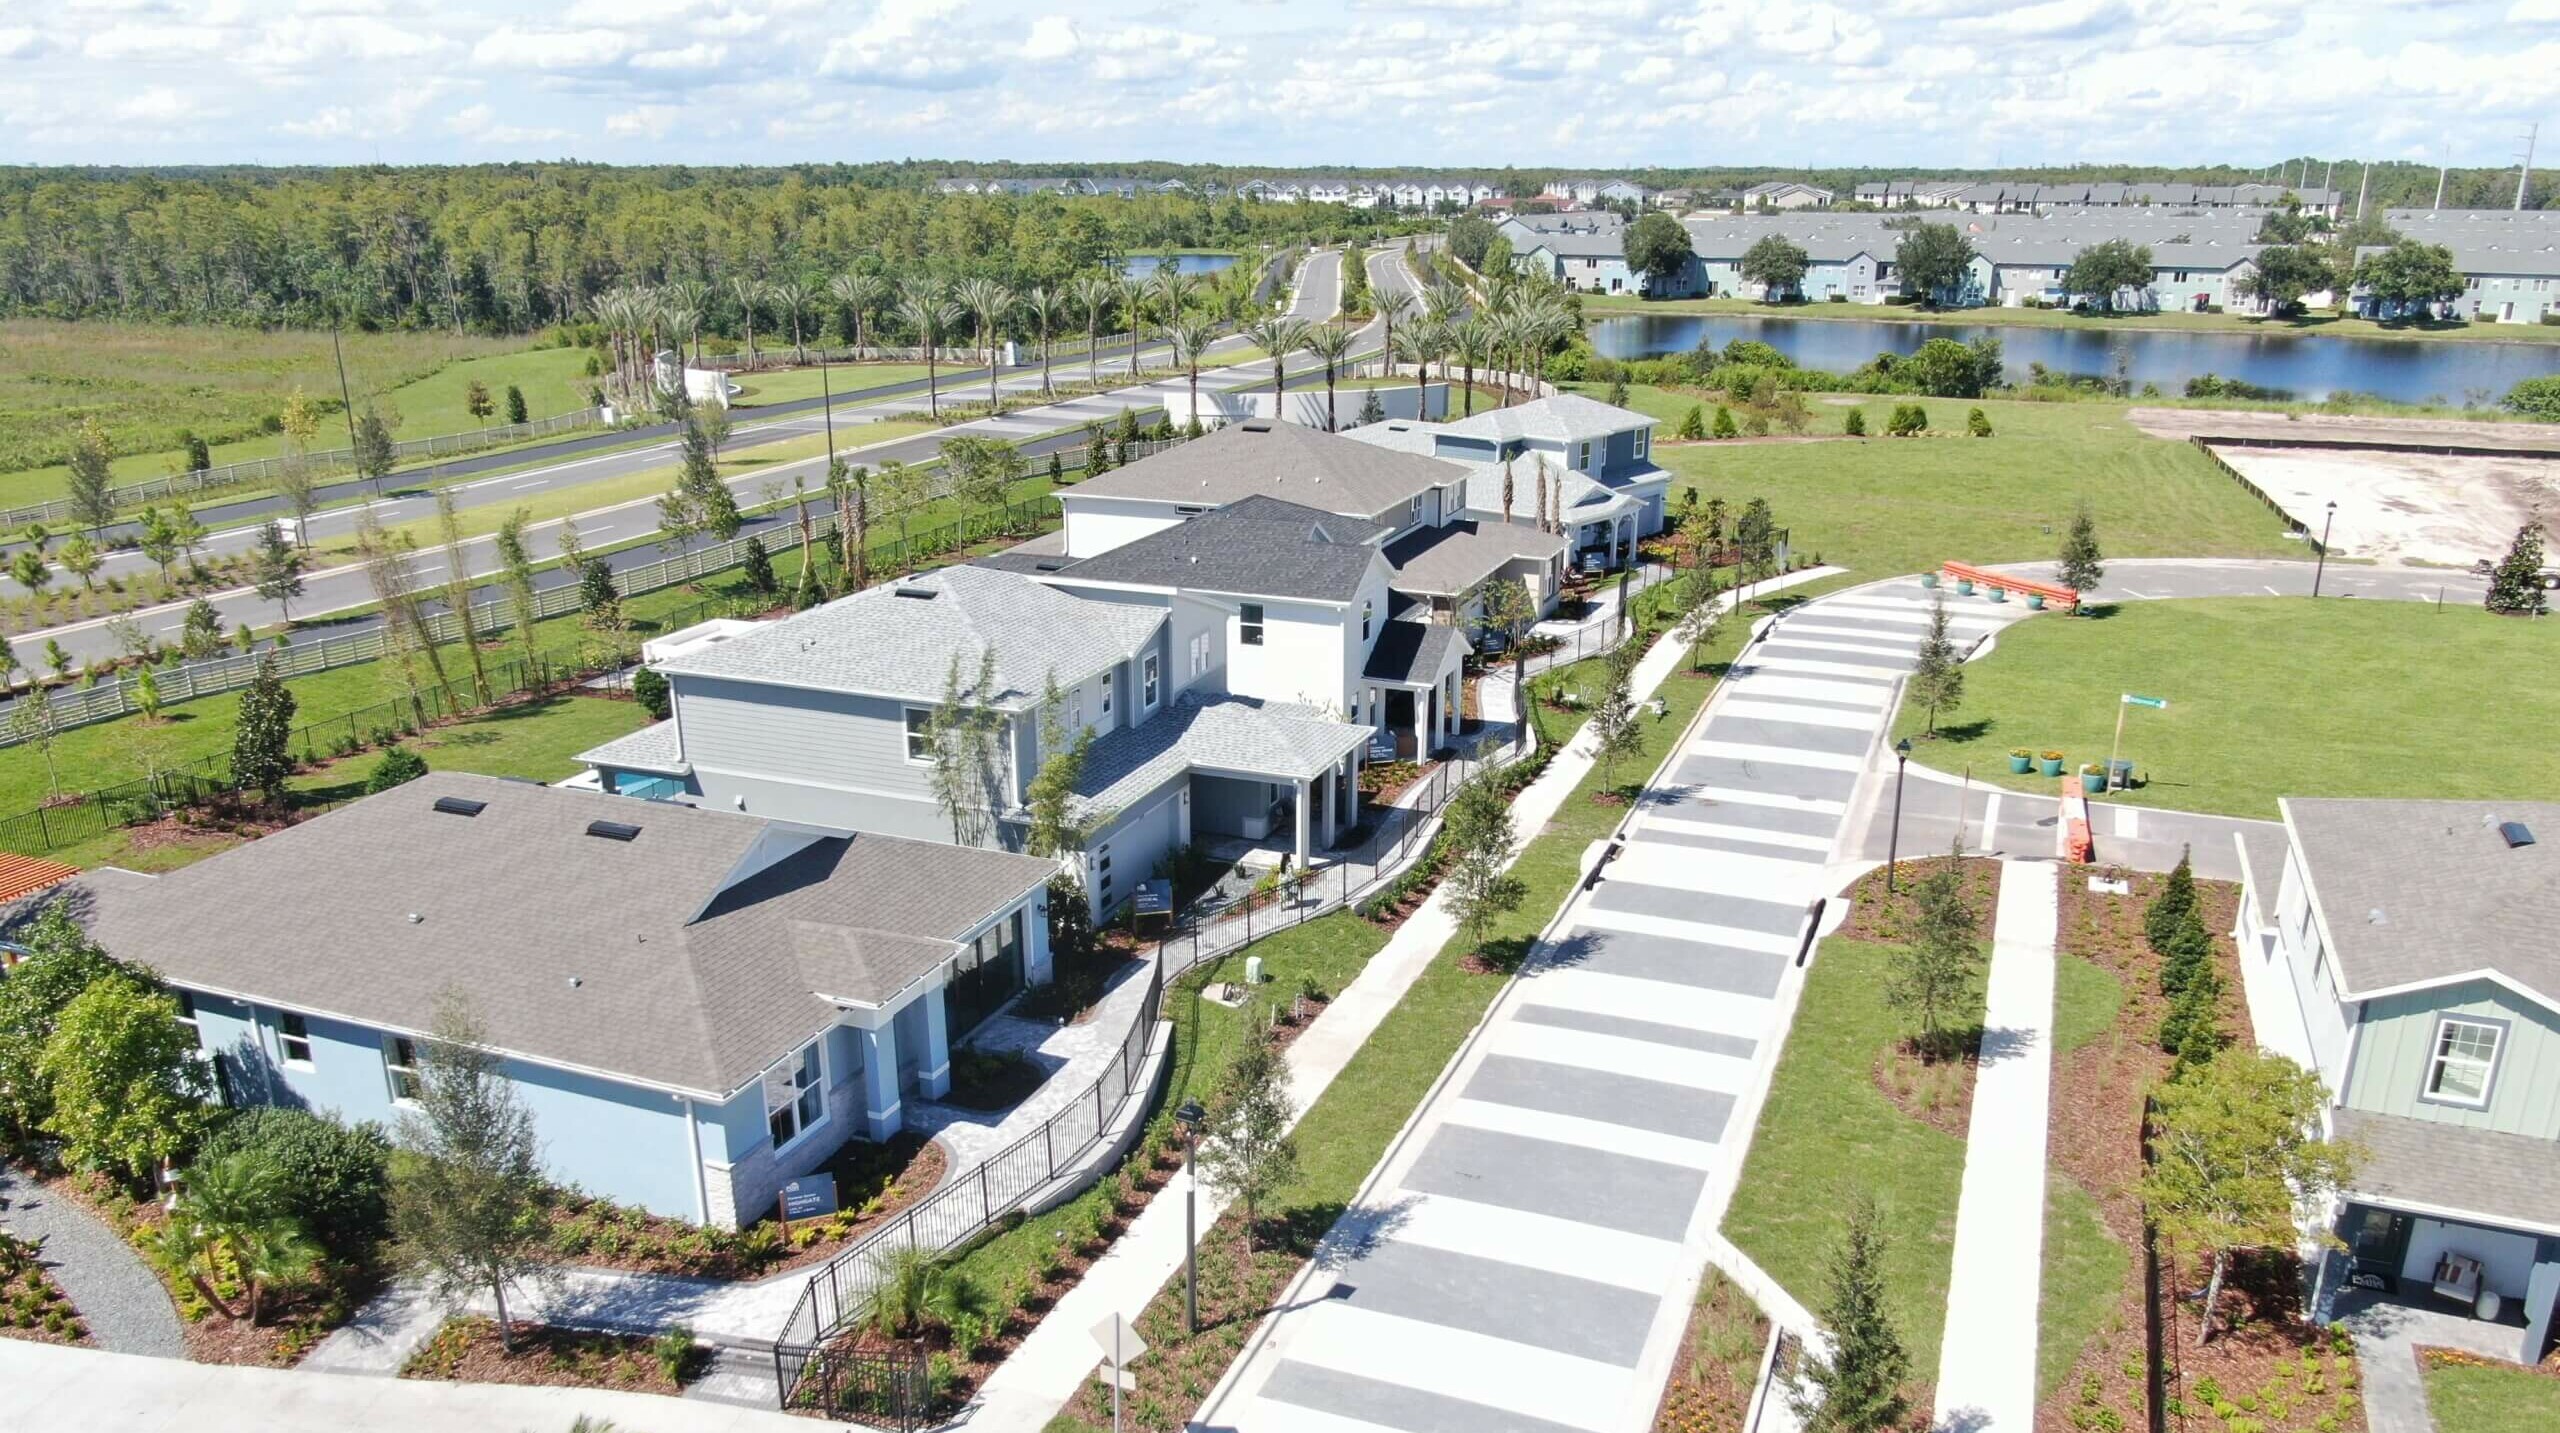 New home sales are now underway at EverBe, Orlando’s newest master-planed neighborhood by Pulte, featuring casually elegant Florida living.